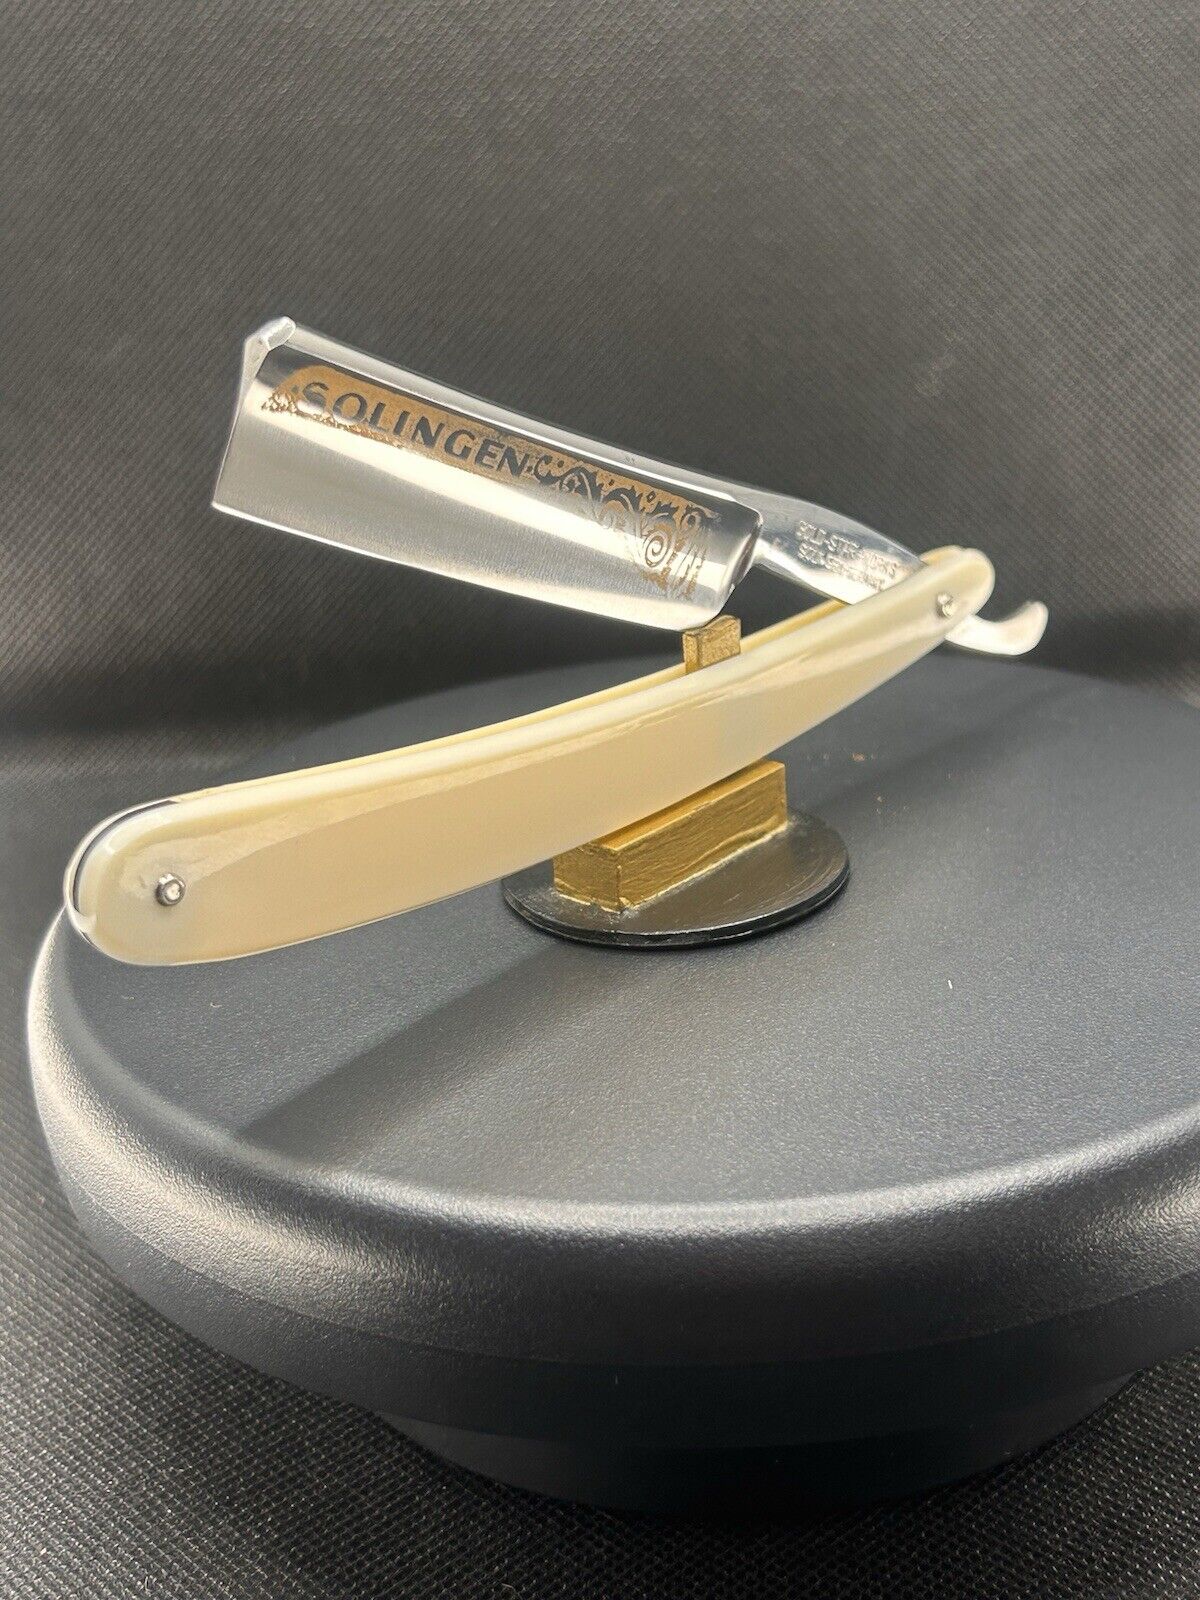 antique straight razor shave ready,” Gold Star Works”